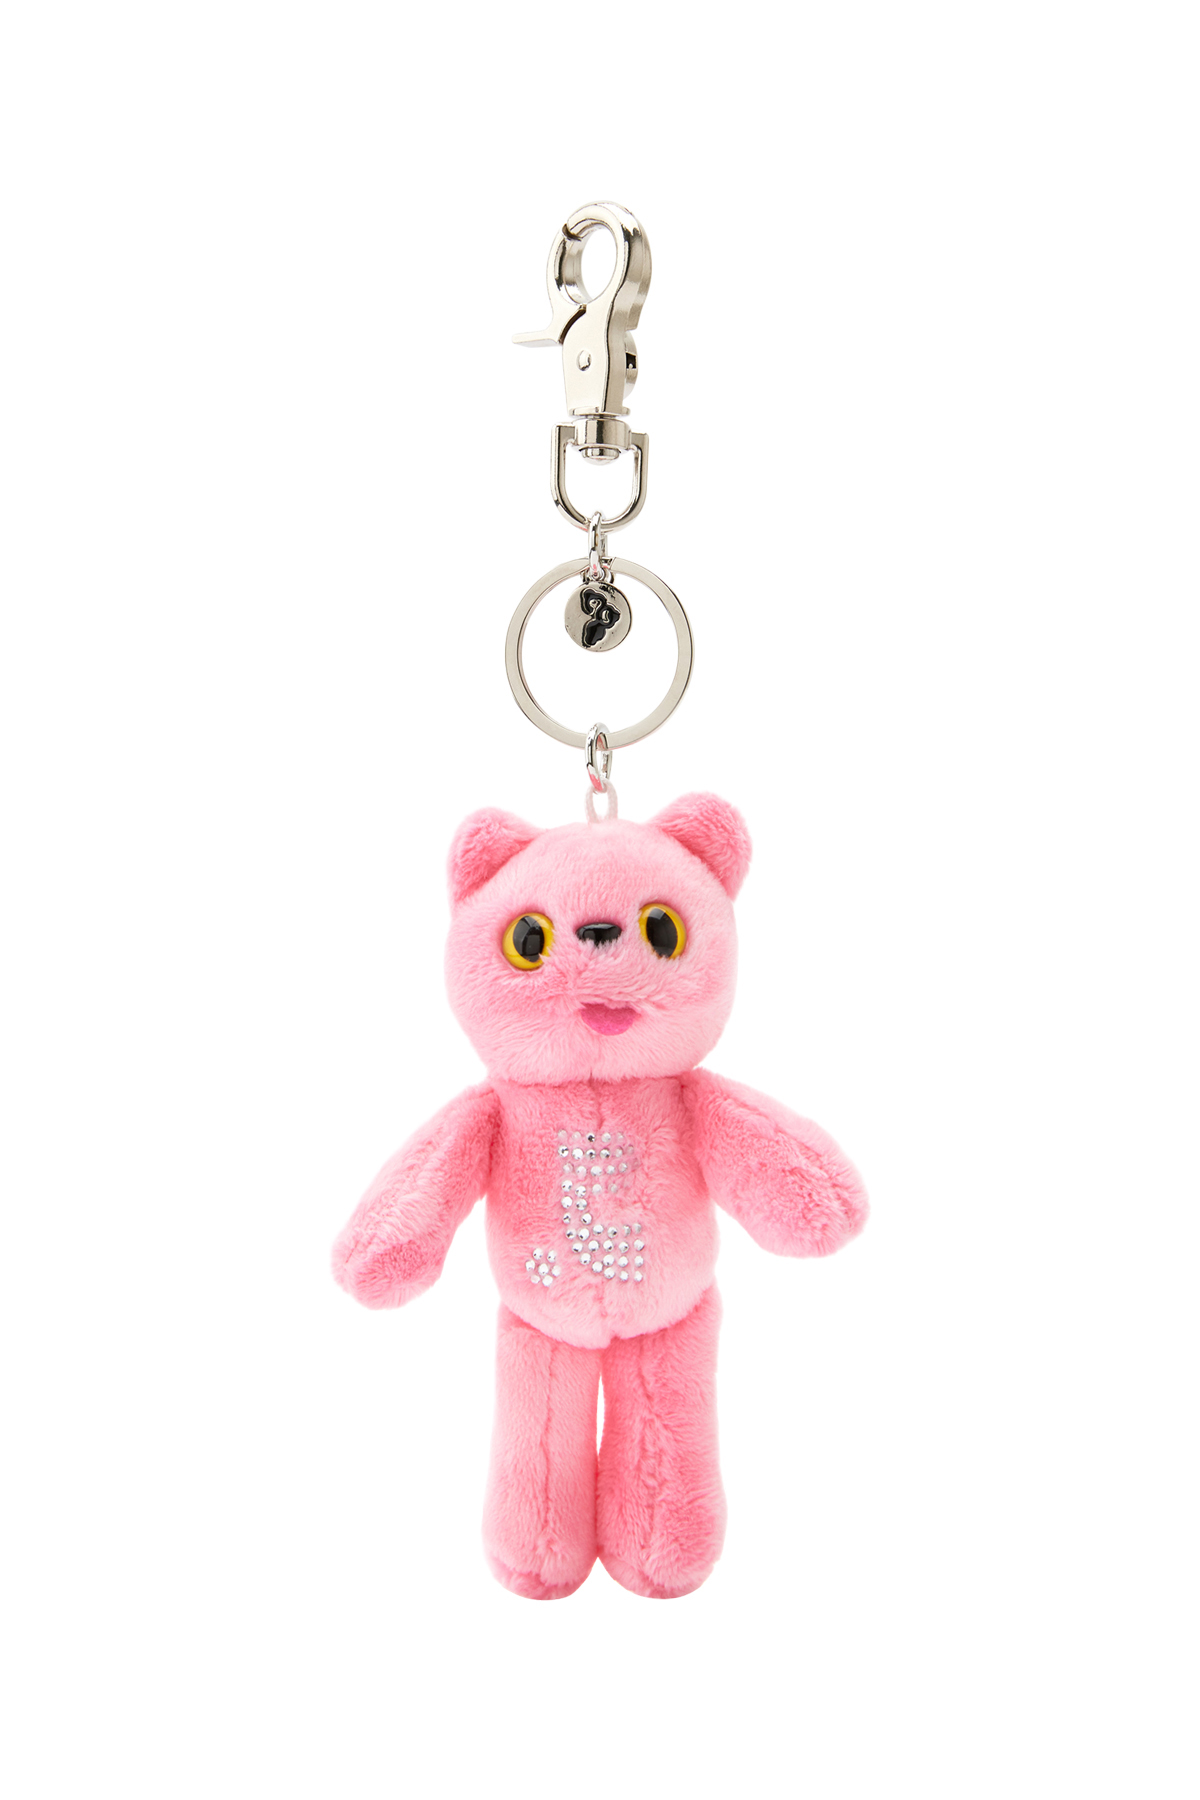 [EXCLUSIVE] PIYONG KEY RING COTTON CANDY (RR with COMFORT) - PINK